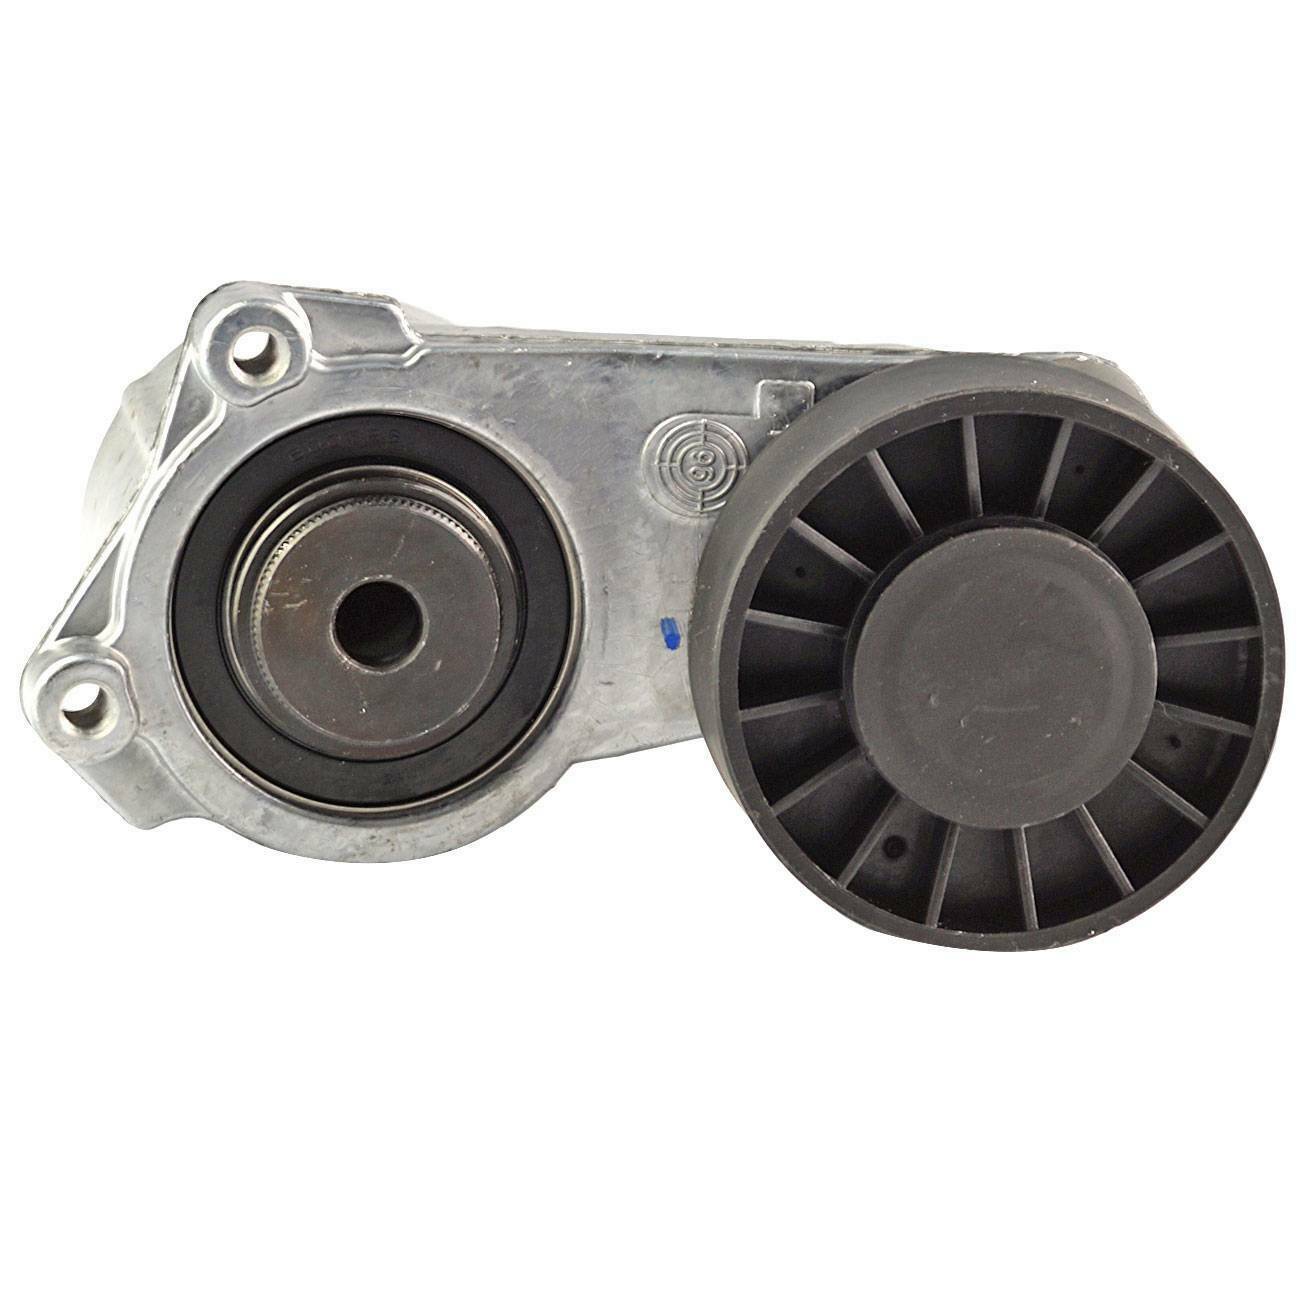 Drive Belt Tensioner for '85-'93 Mercedes W201 W124 S124 230E 1022006970 German Made